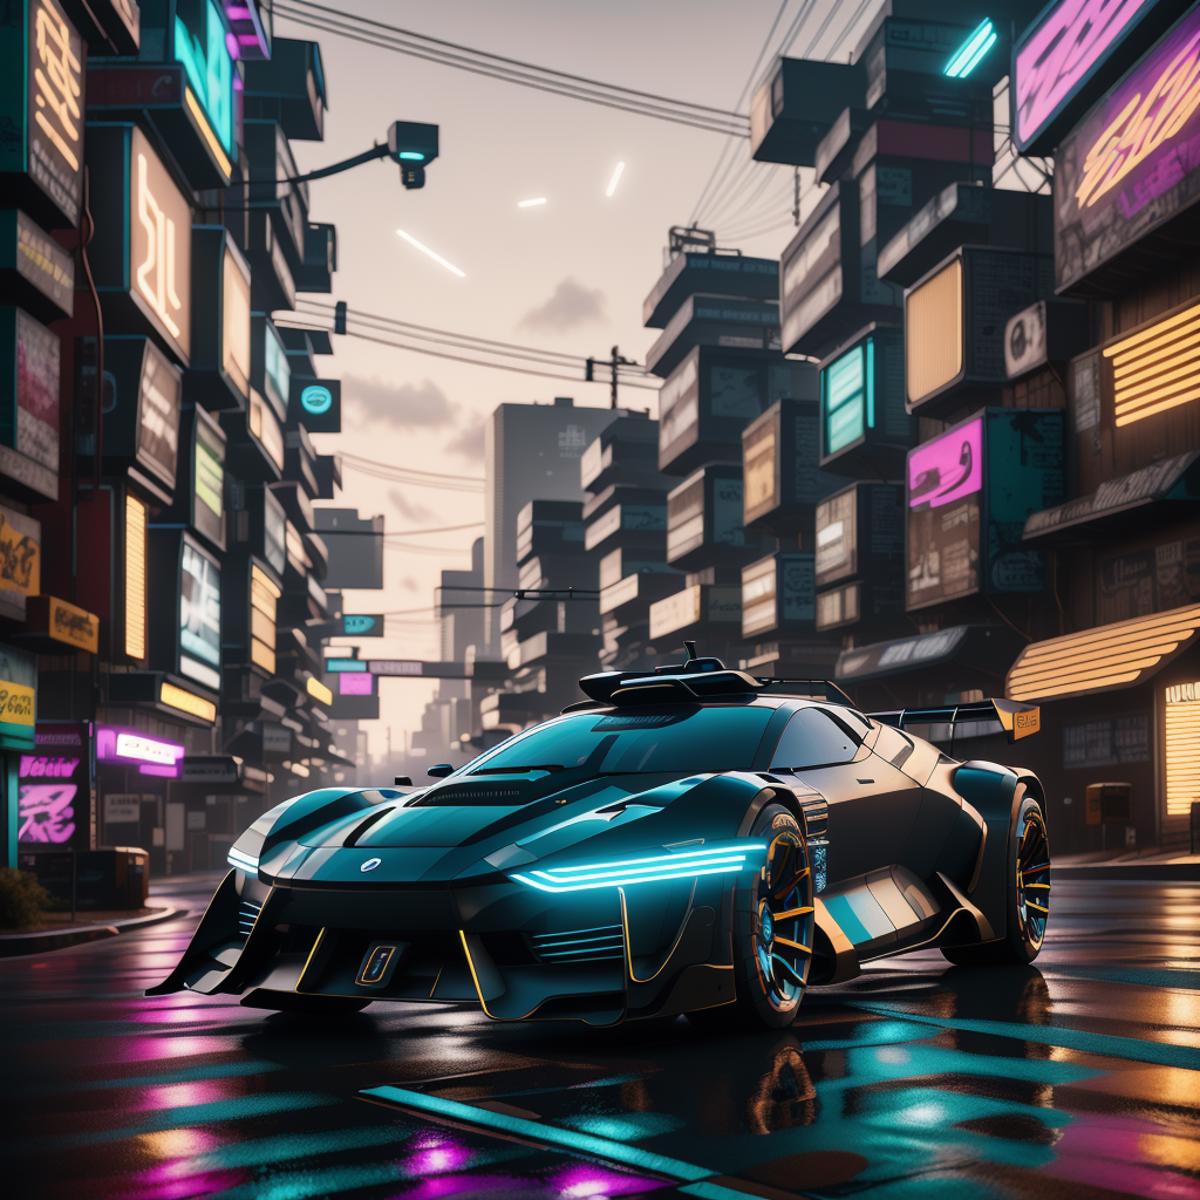 Cyber Cars image by Steeltron2000